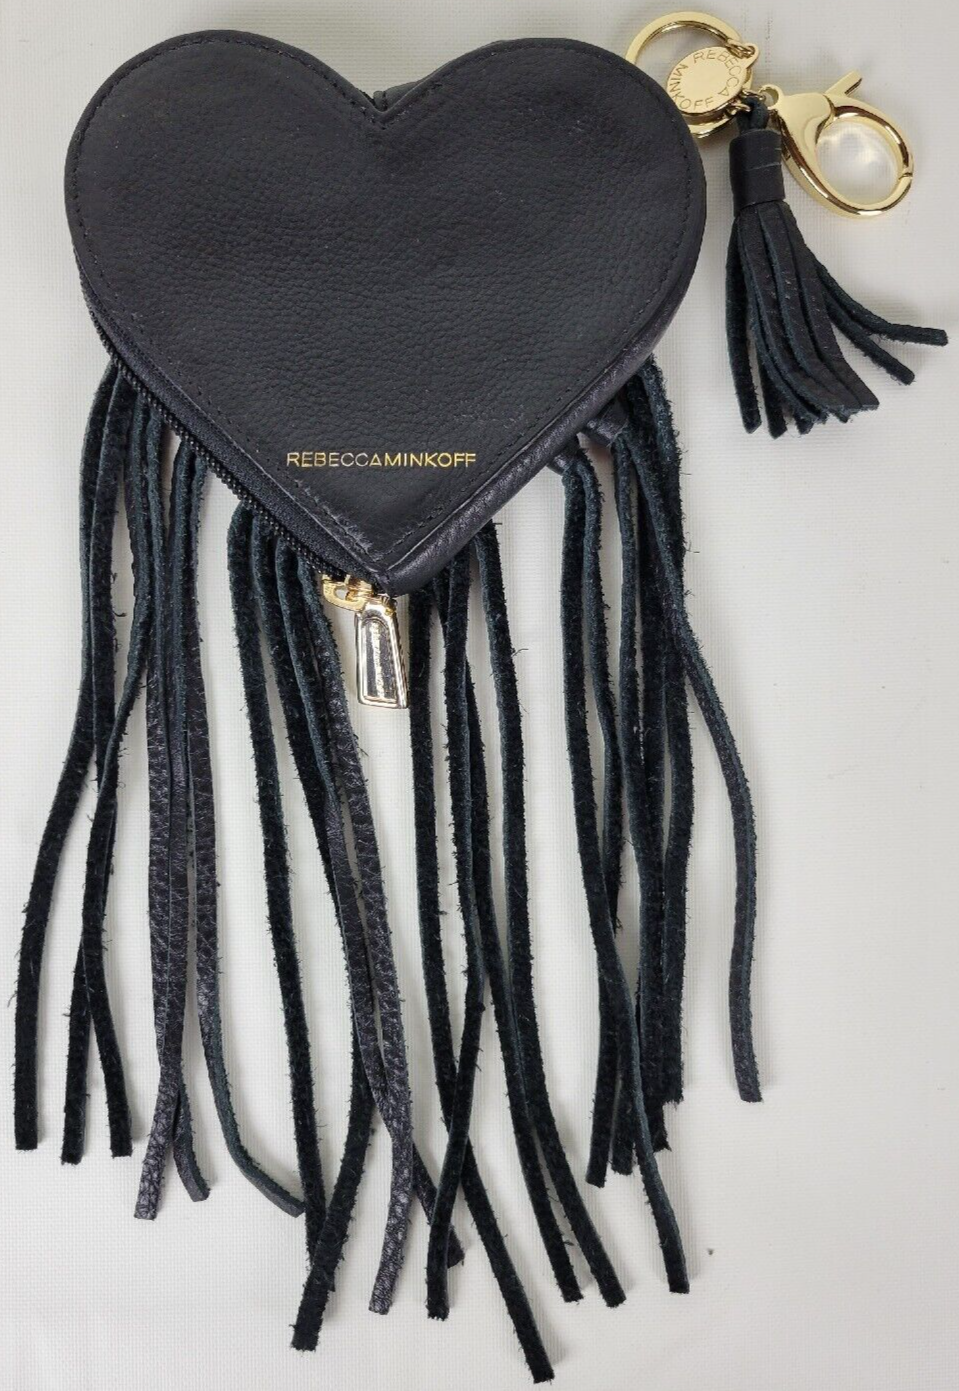 Primary image for Rebecca Minkoff Black Leather Heart Fringe Wallet Pouch Keychain